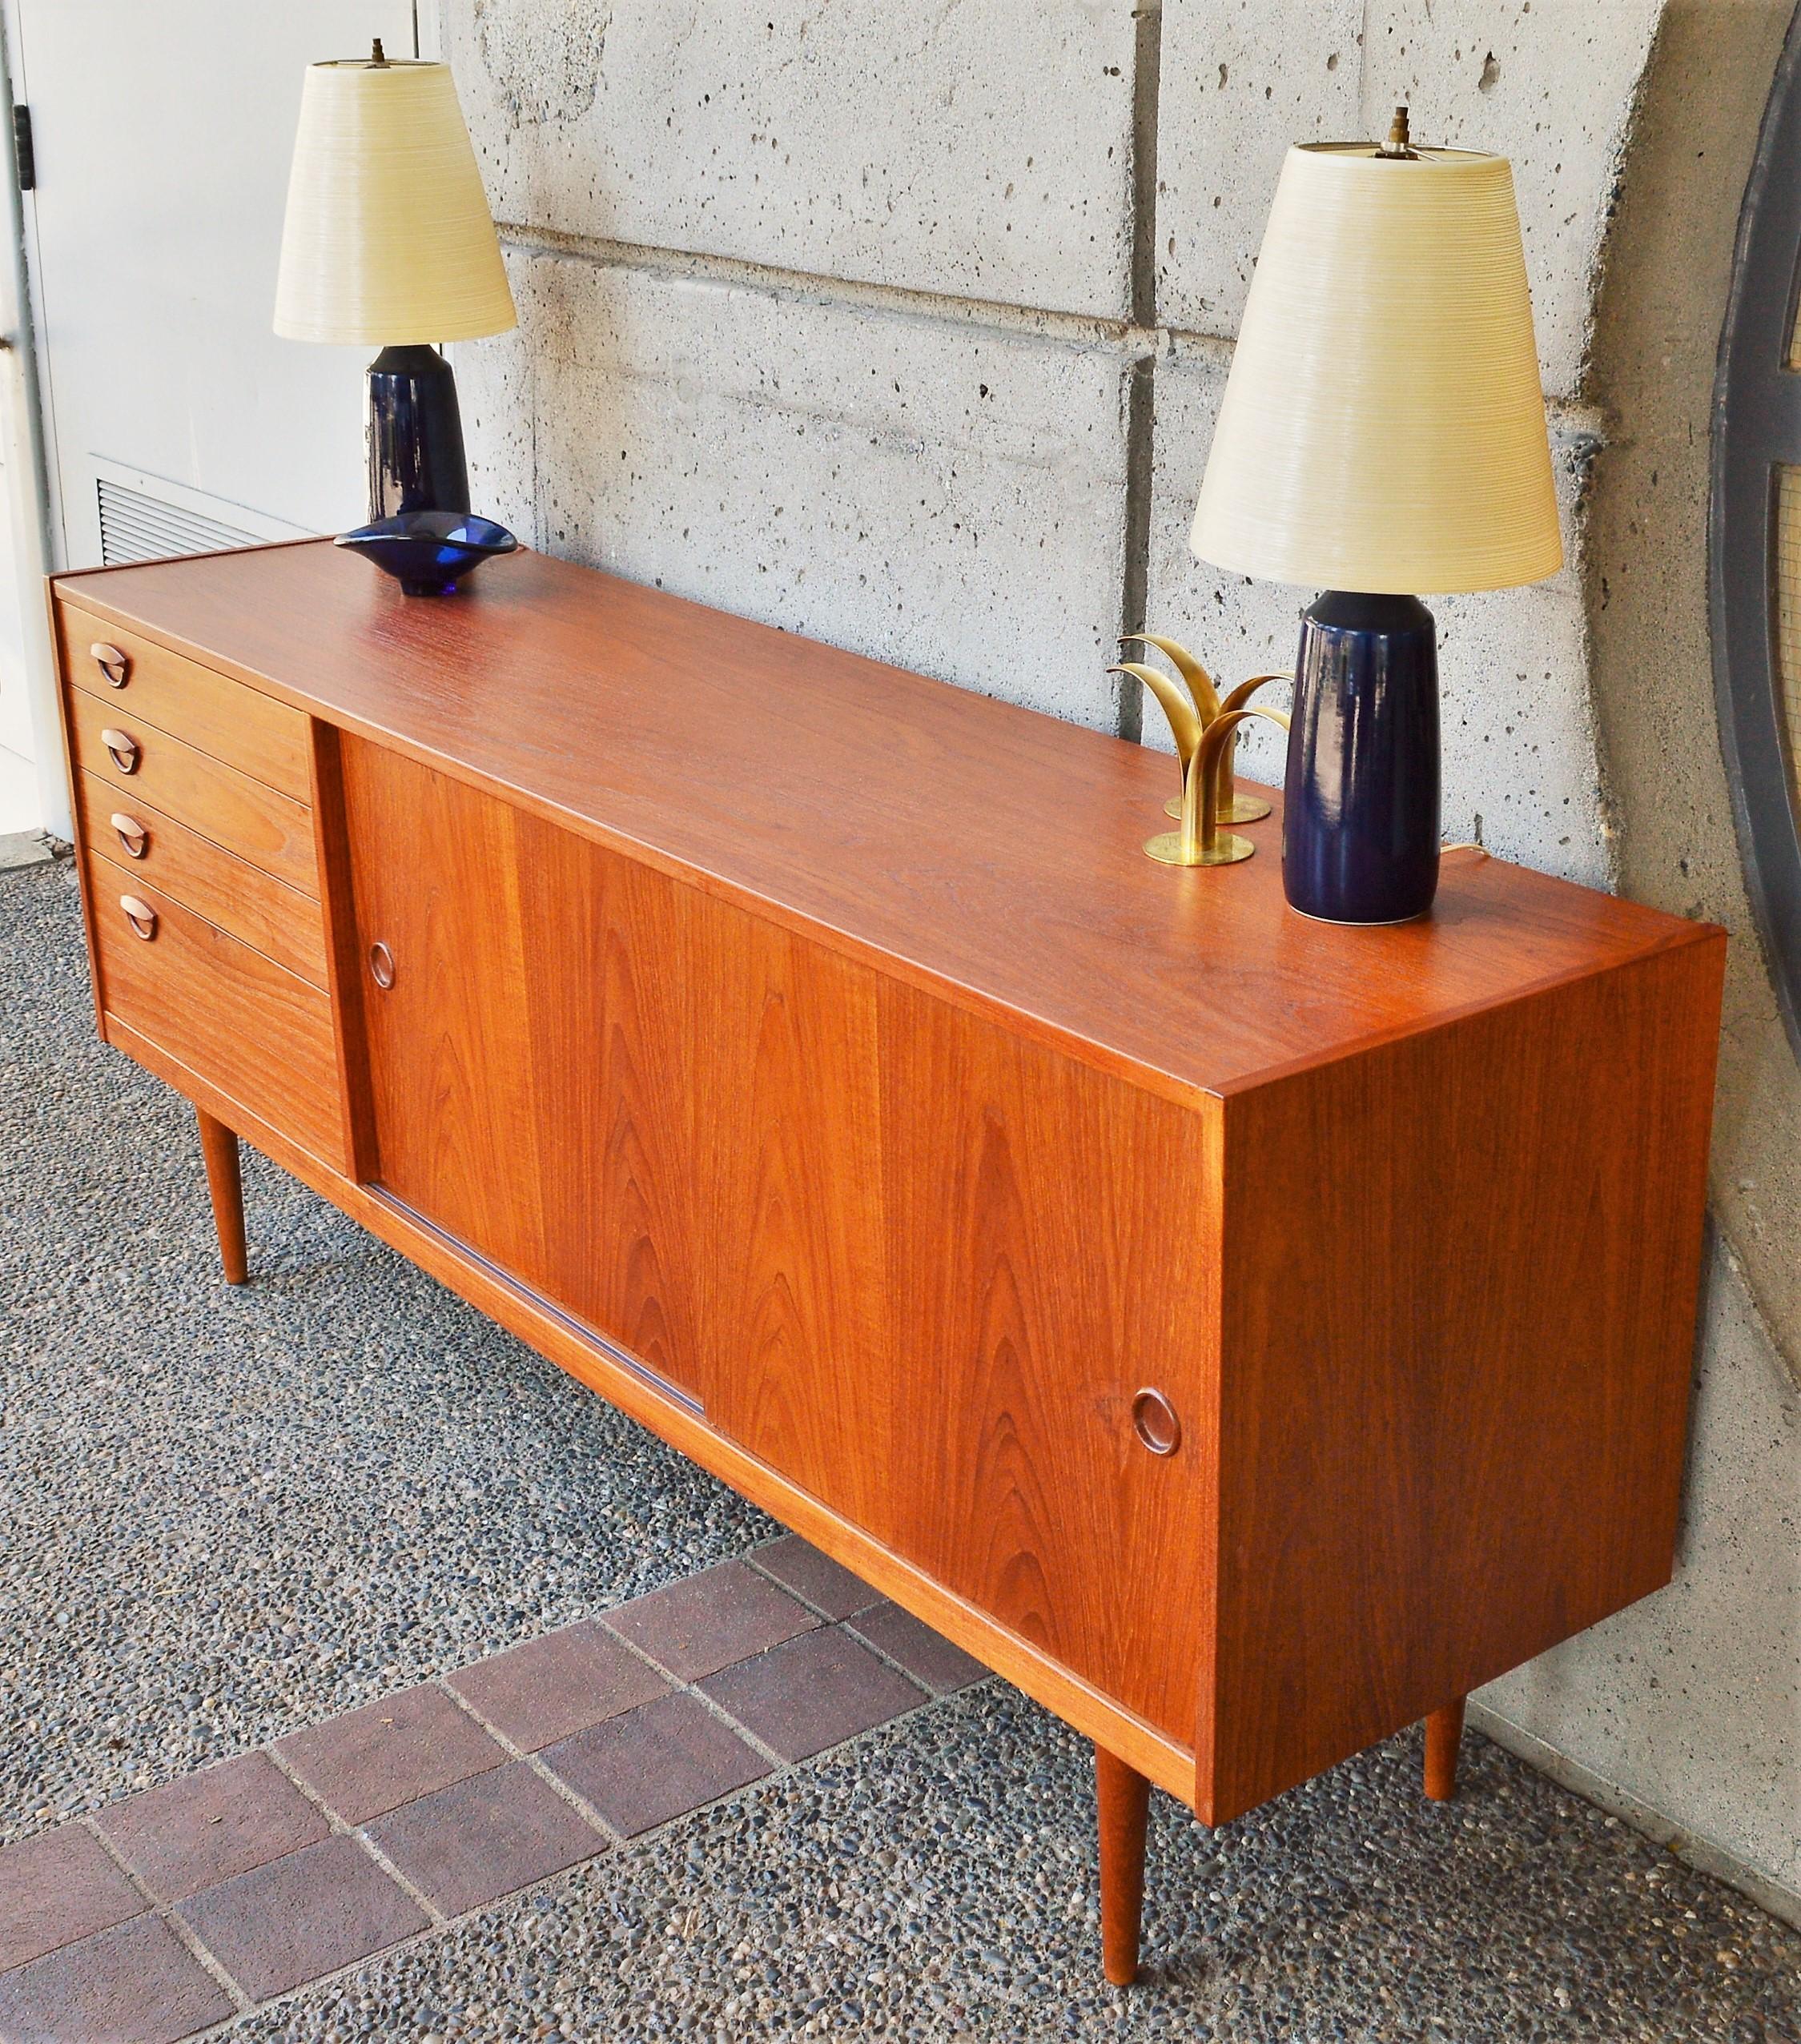 This totally hot Danish modern teak buffet or credenza was designed by Kai Kristiansen in the 1960s with a bank of 4 drawers on the left with his iconic sweet smile shaped sculptural drawer pulls. The top three drawers are more slender, the lowest